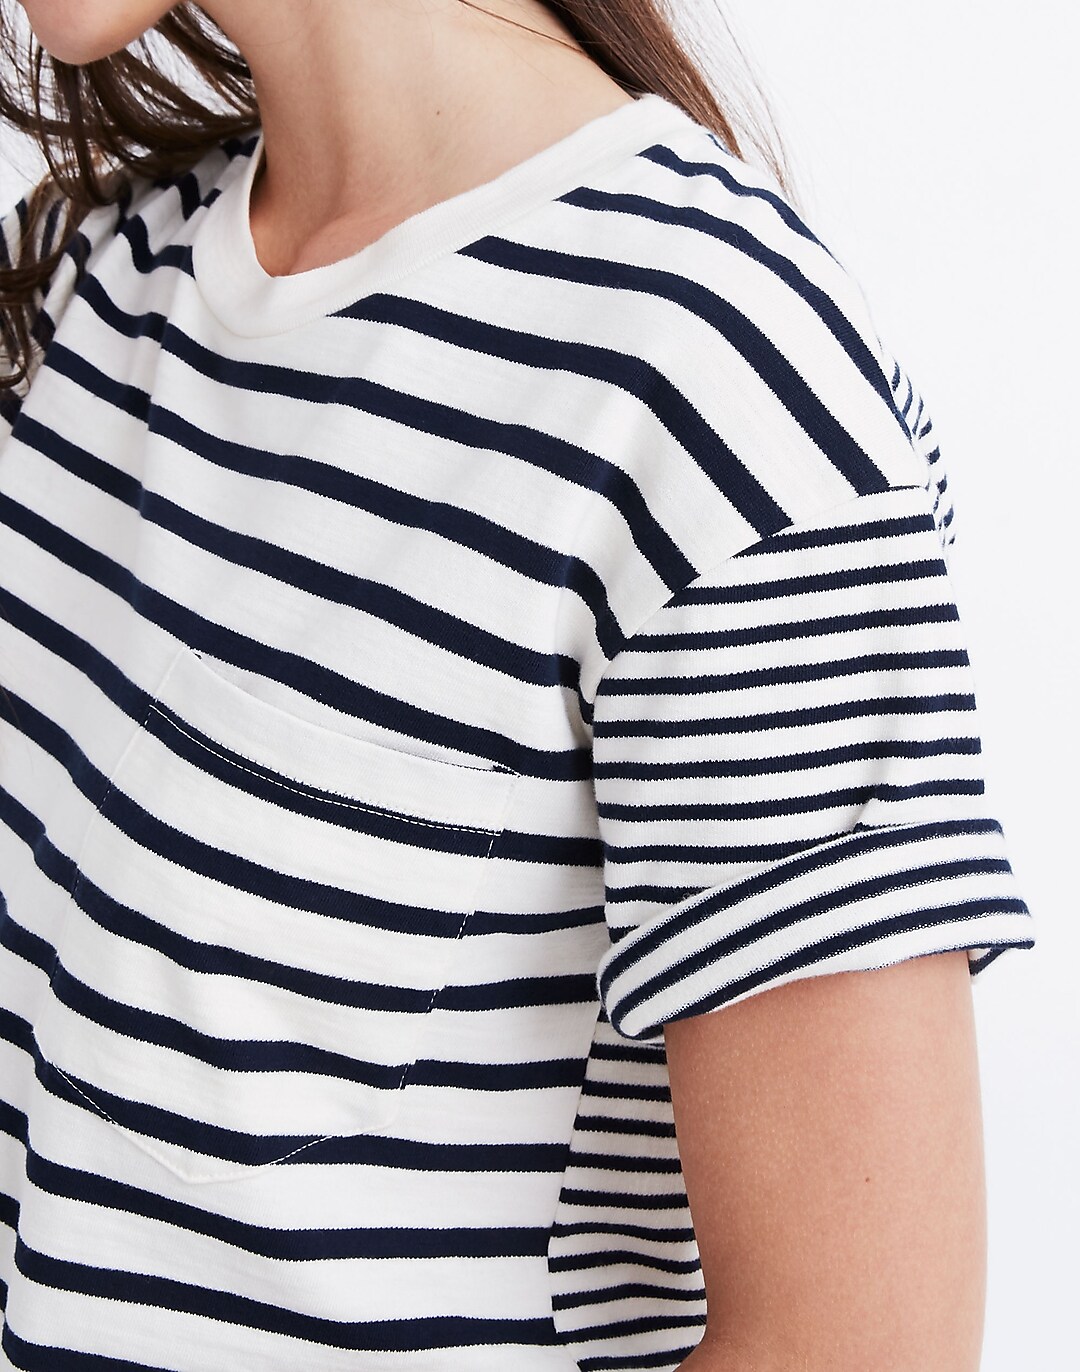 Mixed Stripes Crop Top - Ready to Wear